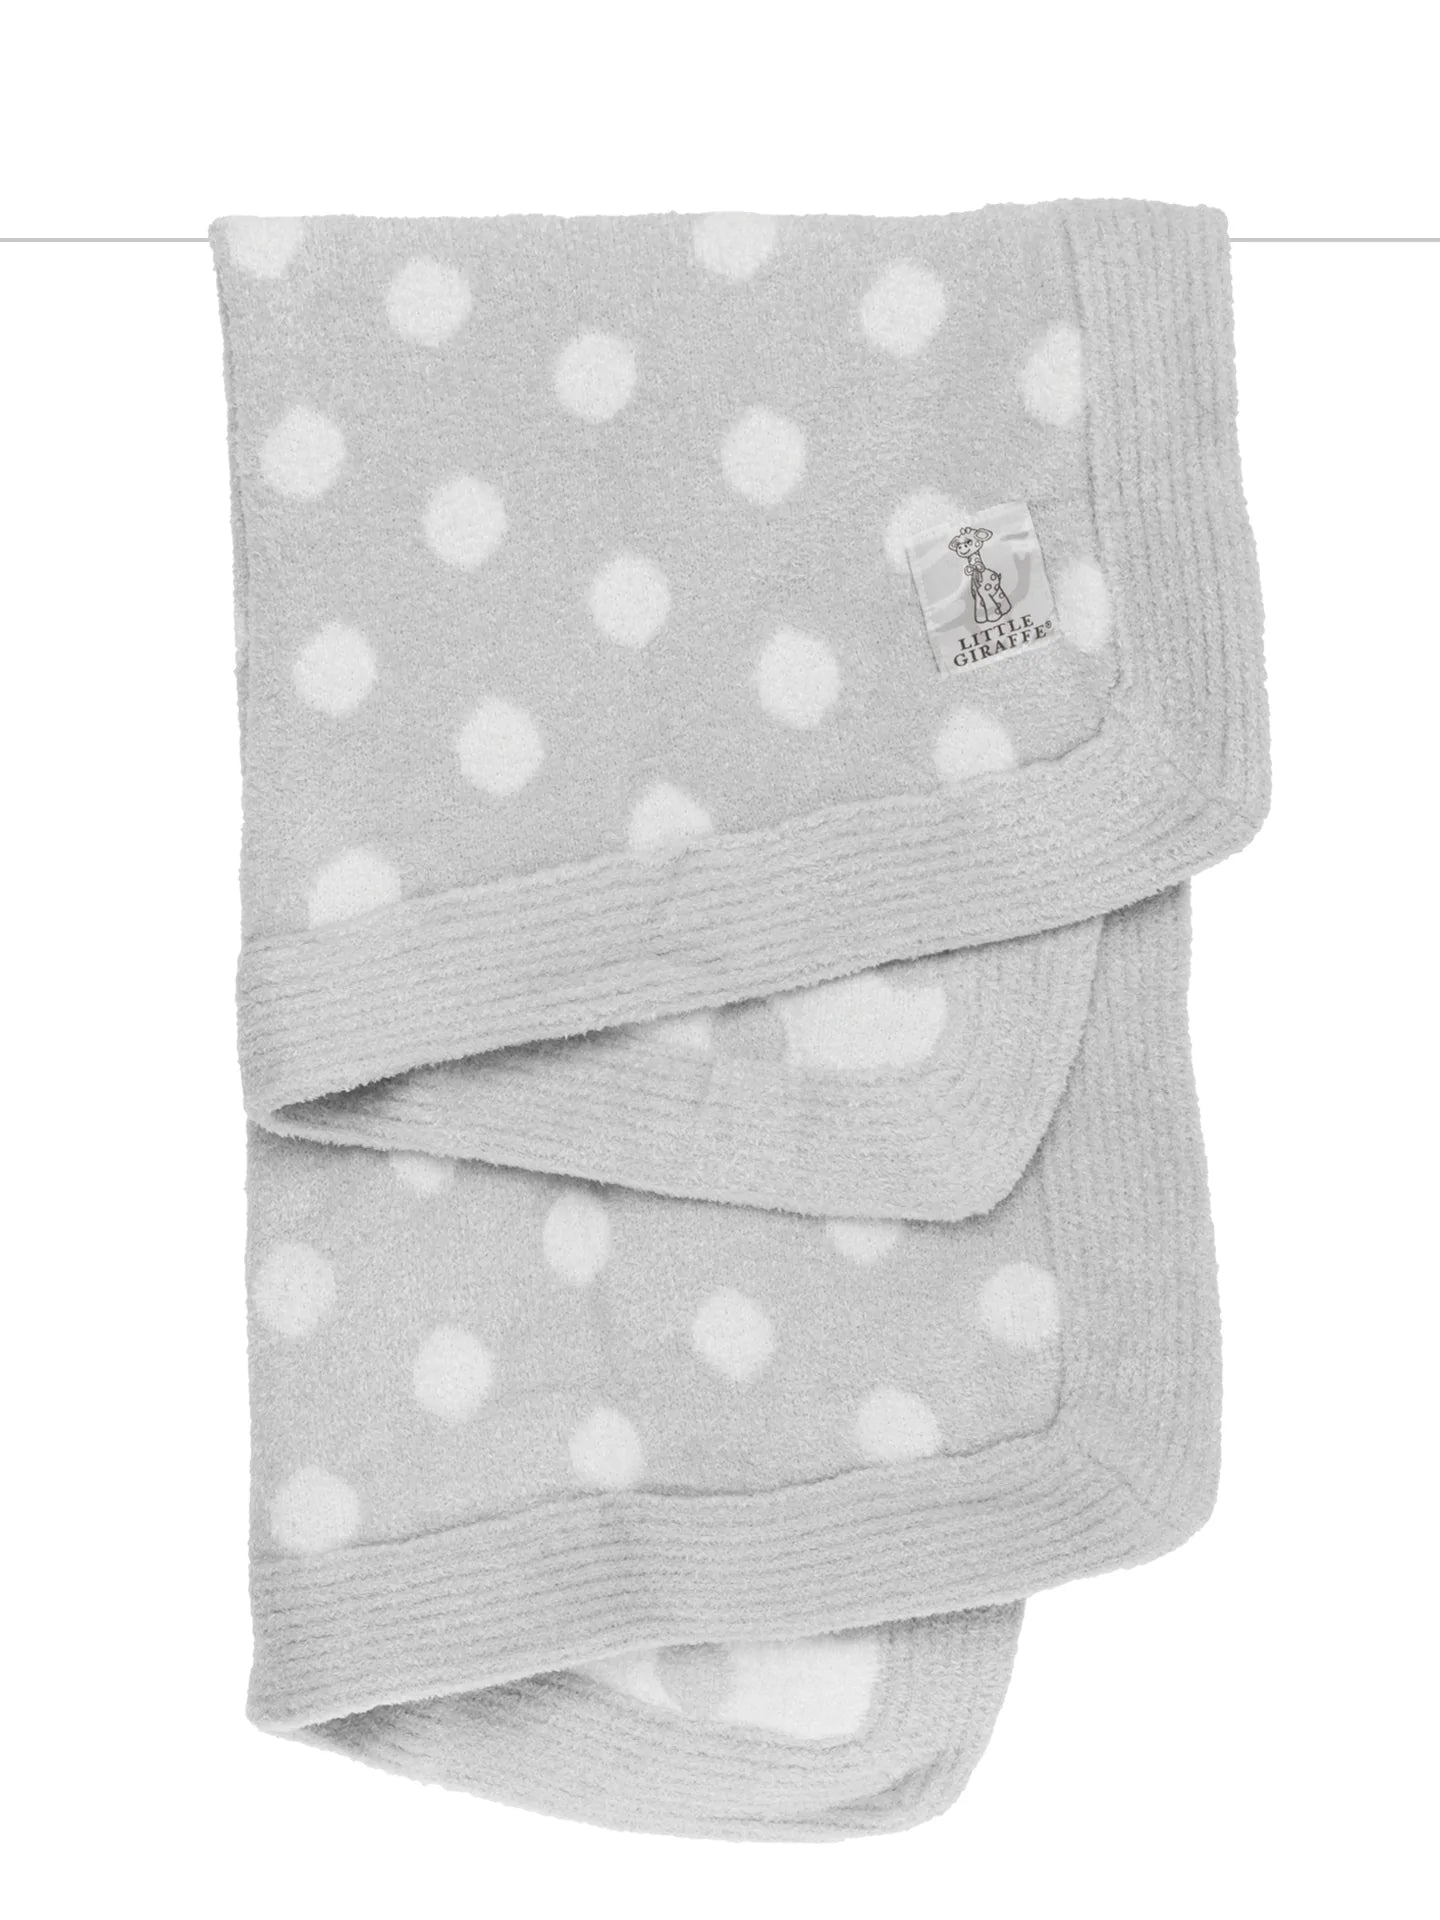 Dolce Dot Blanket, Silver - Magpies Paducah